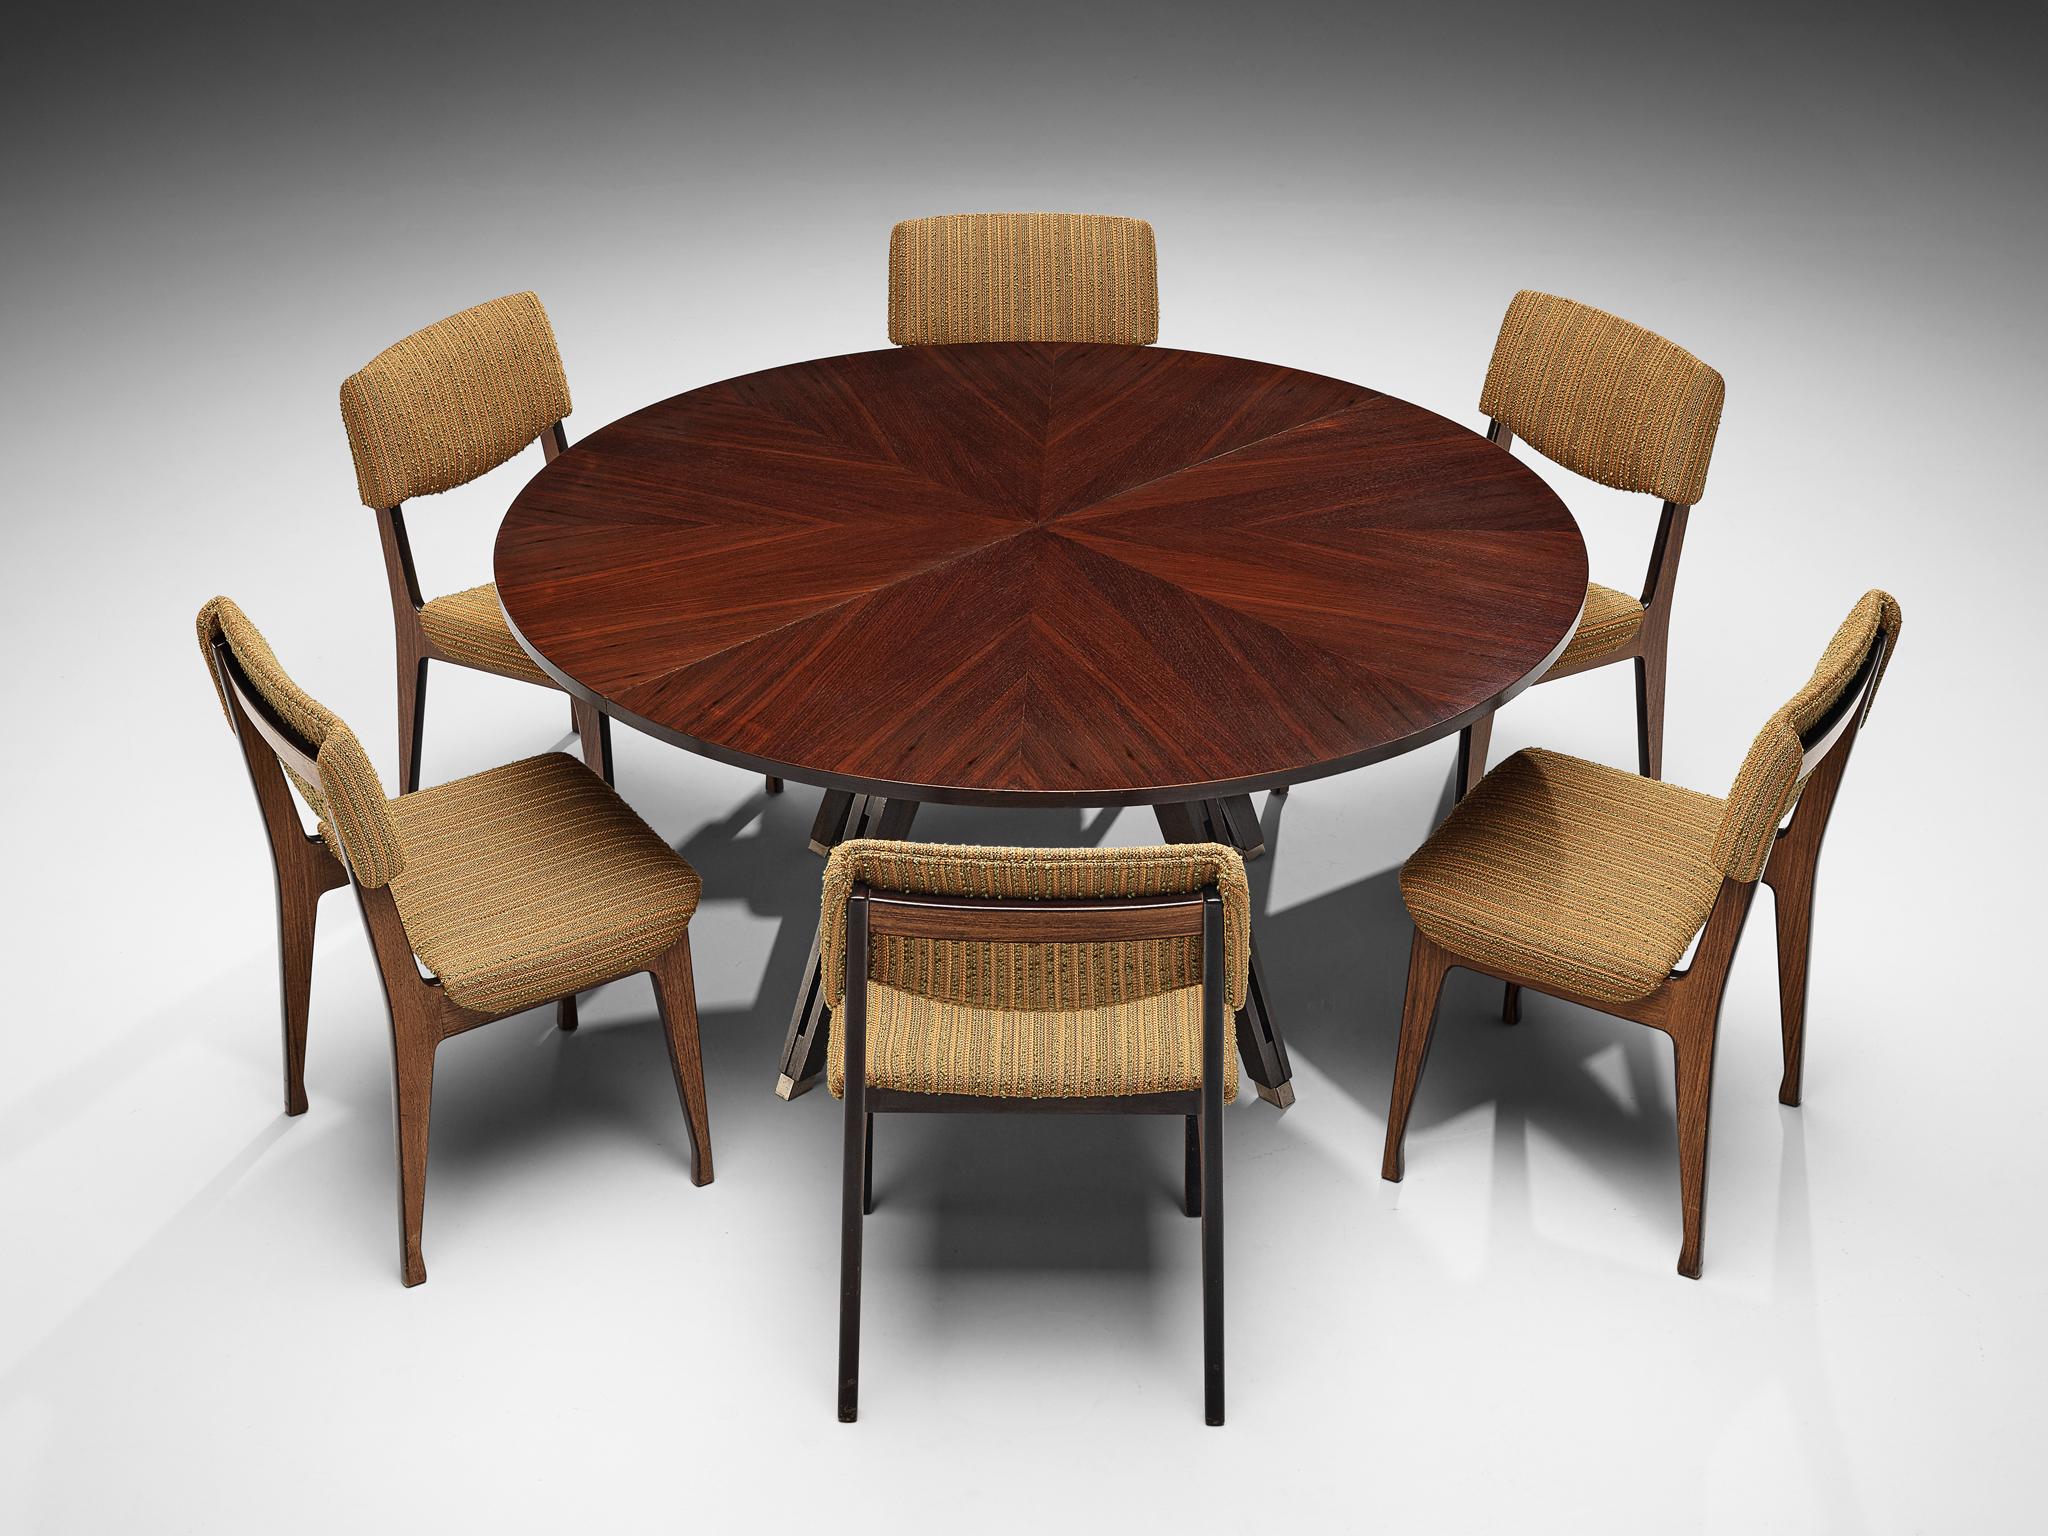 MIM Roma, set of six dining chairs, rosewood, fabric upholstery, Italy, 1960s
Ico Parisi for MIM Roma, dining table, rosewood and stainless steel, Italy, 1960s

This set of six dining chairs for MIM Roma shows a well balanced design. With its